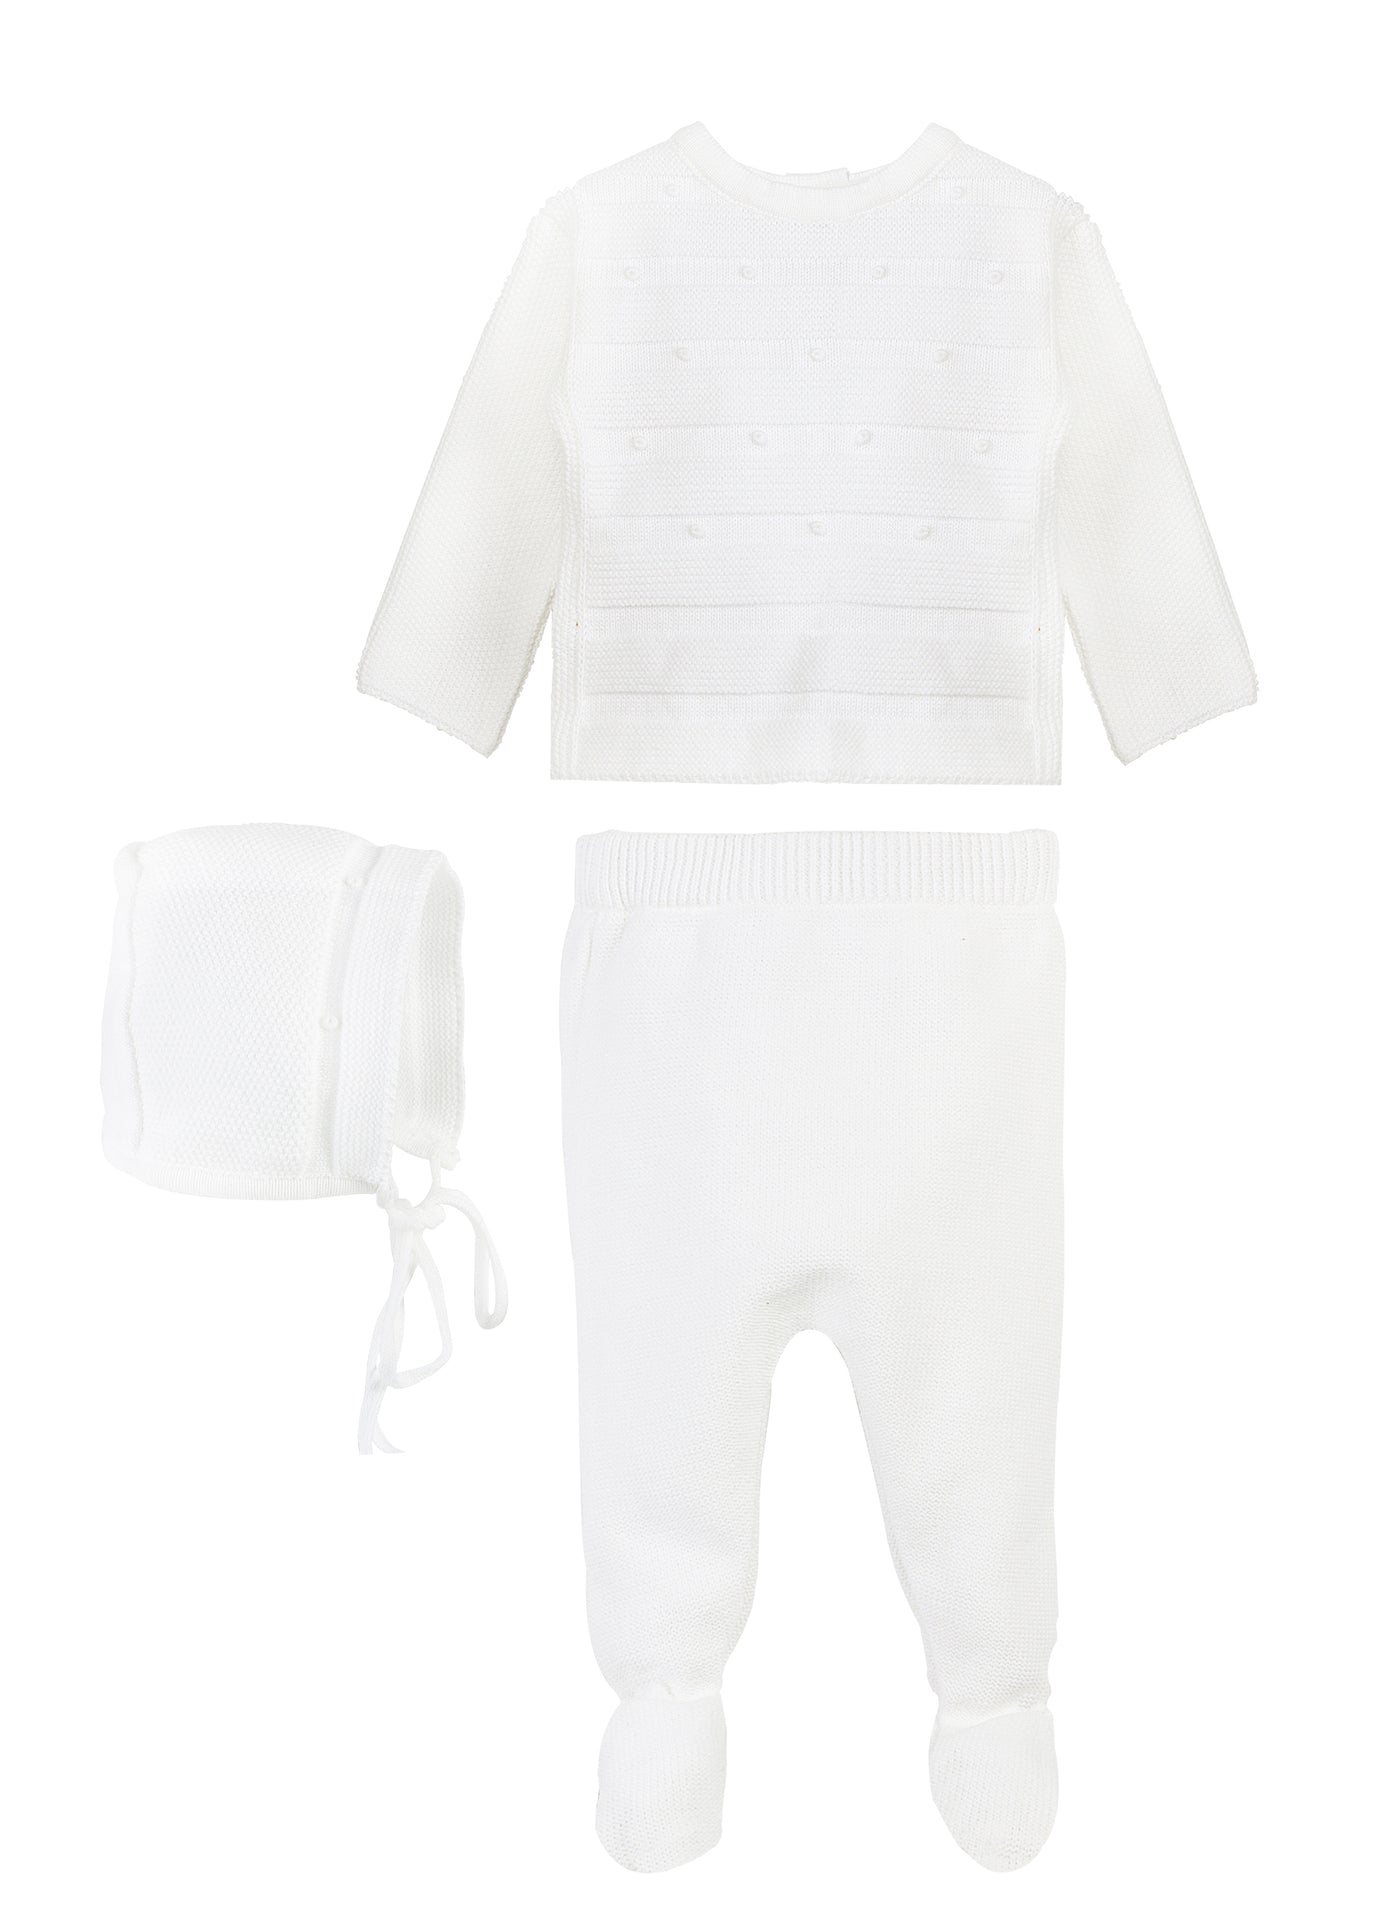 Piccino Piccina Bris Outfit Knit Ribbed White  (Top, Footed Pant, Bonnet, Blanket)